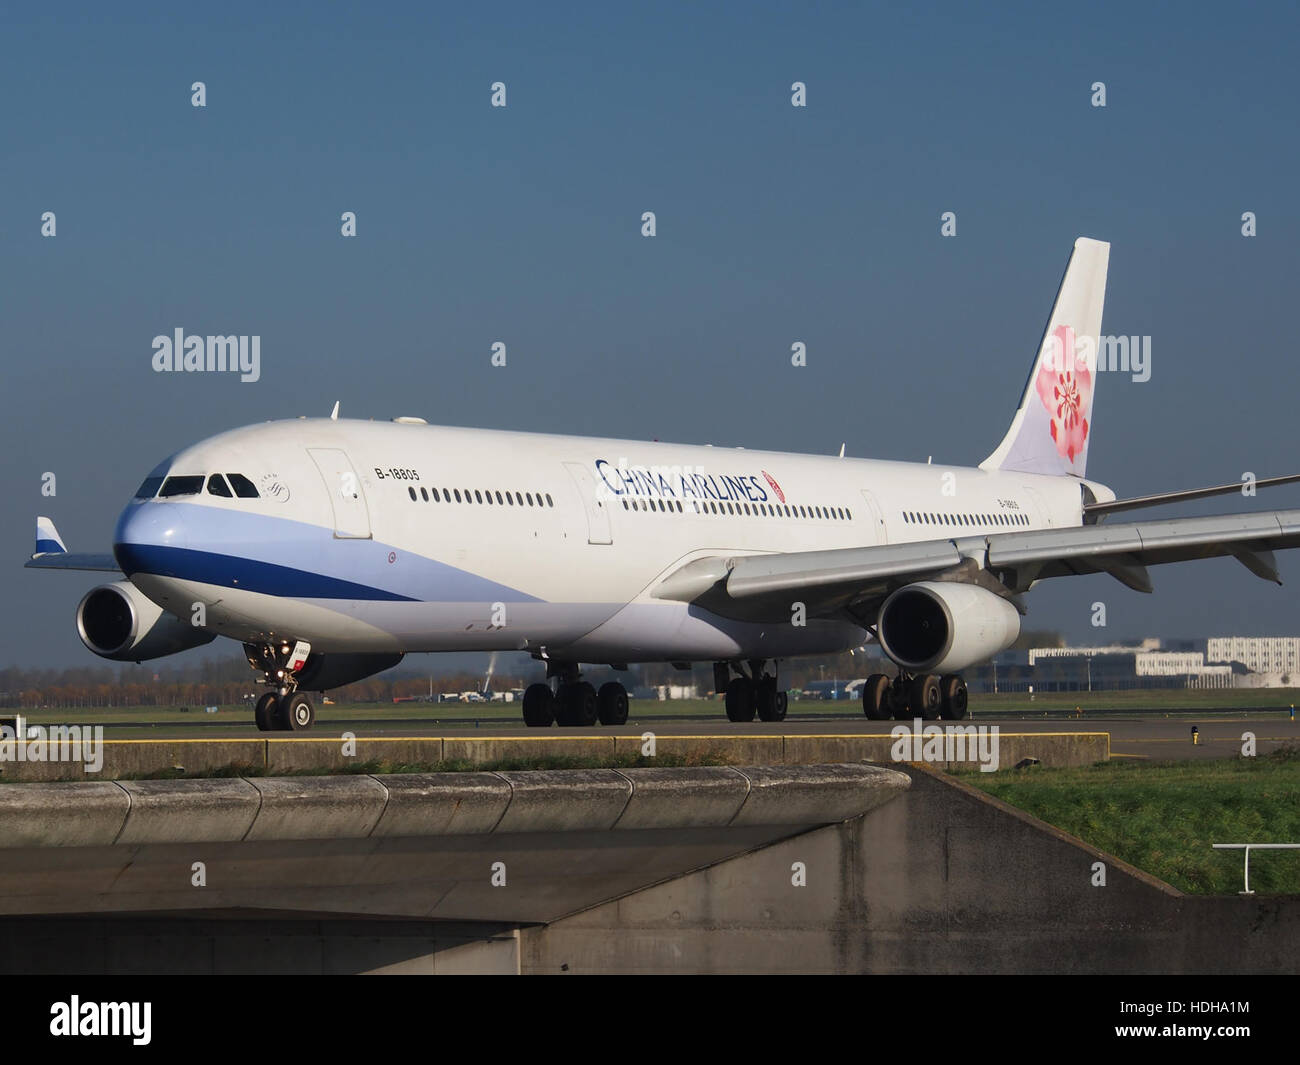 B-18805 (aircraft) China Airlines Airbus A340-313 - cn 415 at Schiphol pic2 Stock Photo